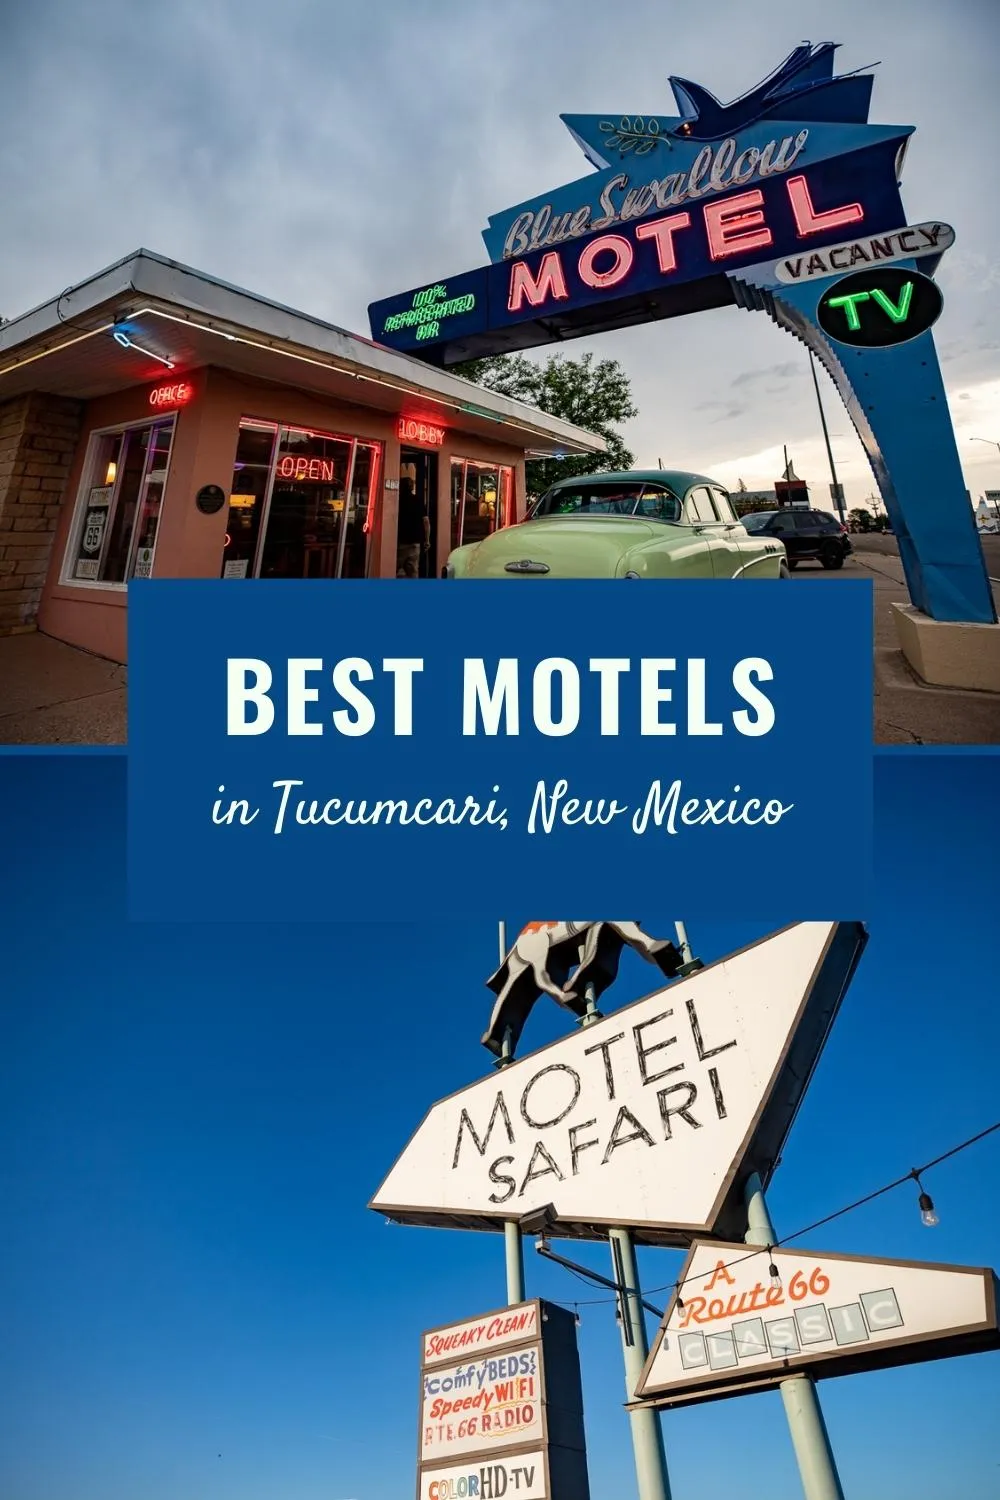 If you're taking a Route 66 road trip and looking for the best motels in Tucumcari, New Mexico, there are plenty of options to choose from. Whether you're looking for a historic Route 66 motel with vintage charm and a bright neon sign or a national chain hotel with a swimming pool and fitness center, you'll be sure to find the perfect place to stay in Tucumcari NM. #Route66 #Route66Motel #Route66Motels #Route66RoadTrip #NewMexicoRoute66 #NewMexico #NewMexicoRoarTrip #TucumcariNewMexico